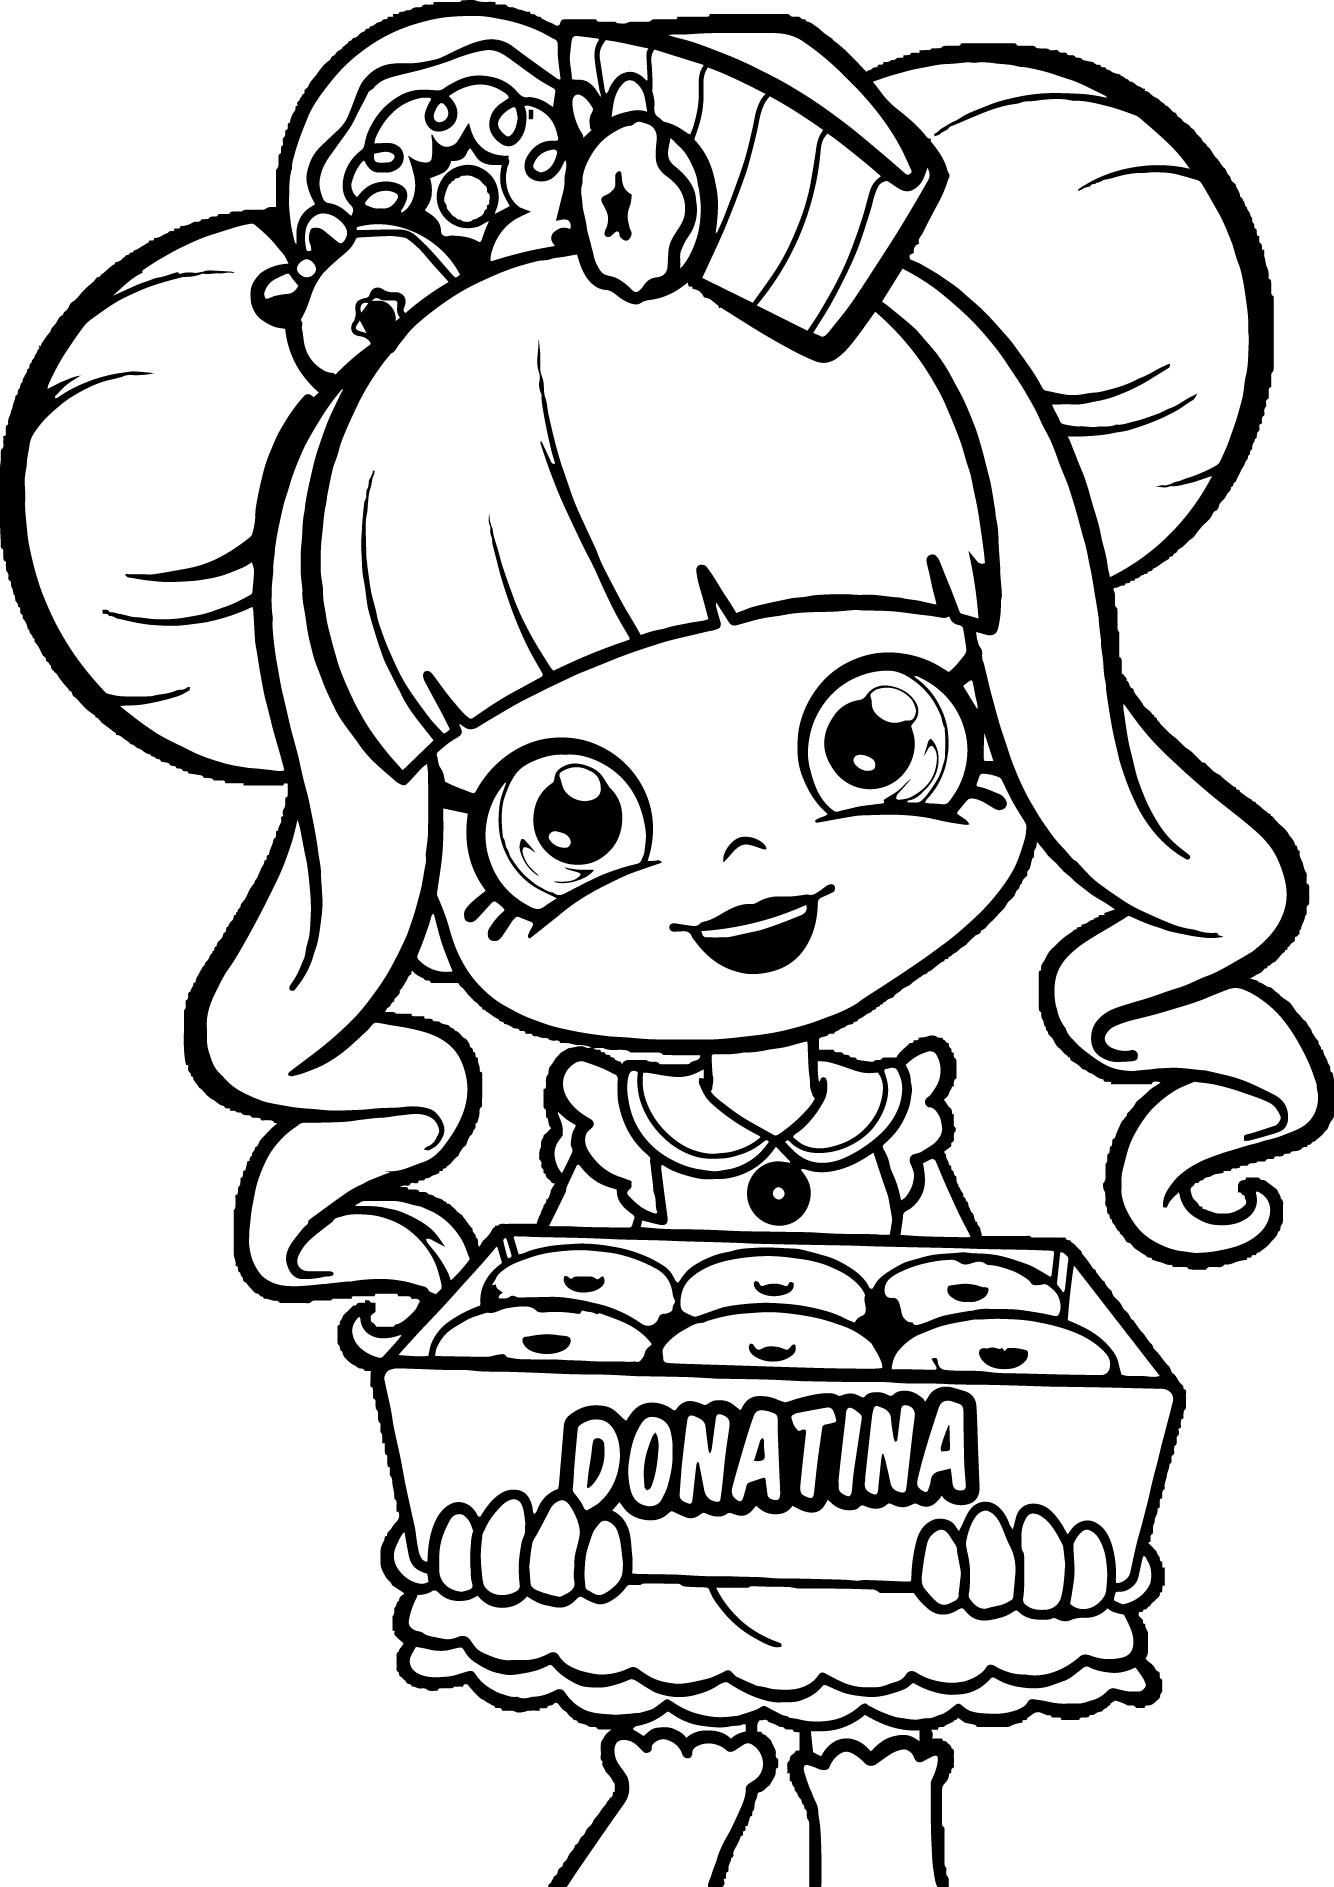 Coloring Pages For Girls Shopkins Cookie
 Shopkins Donatina Girl Coloring Page